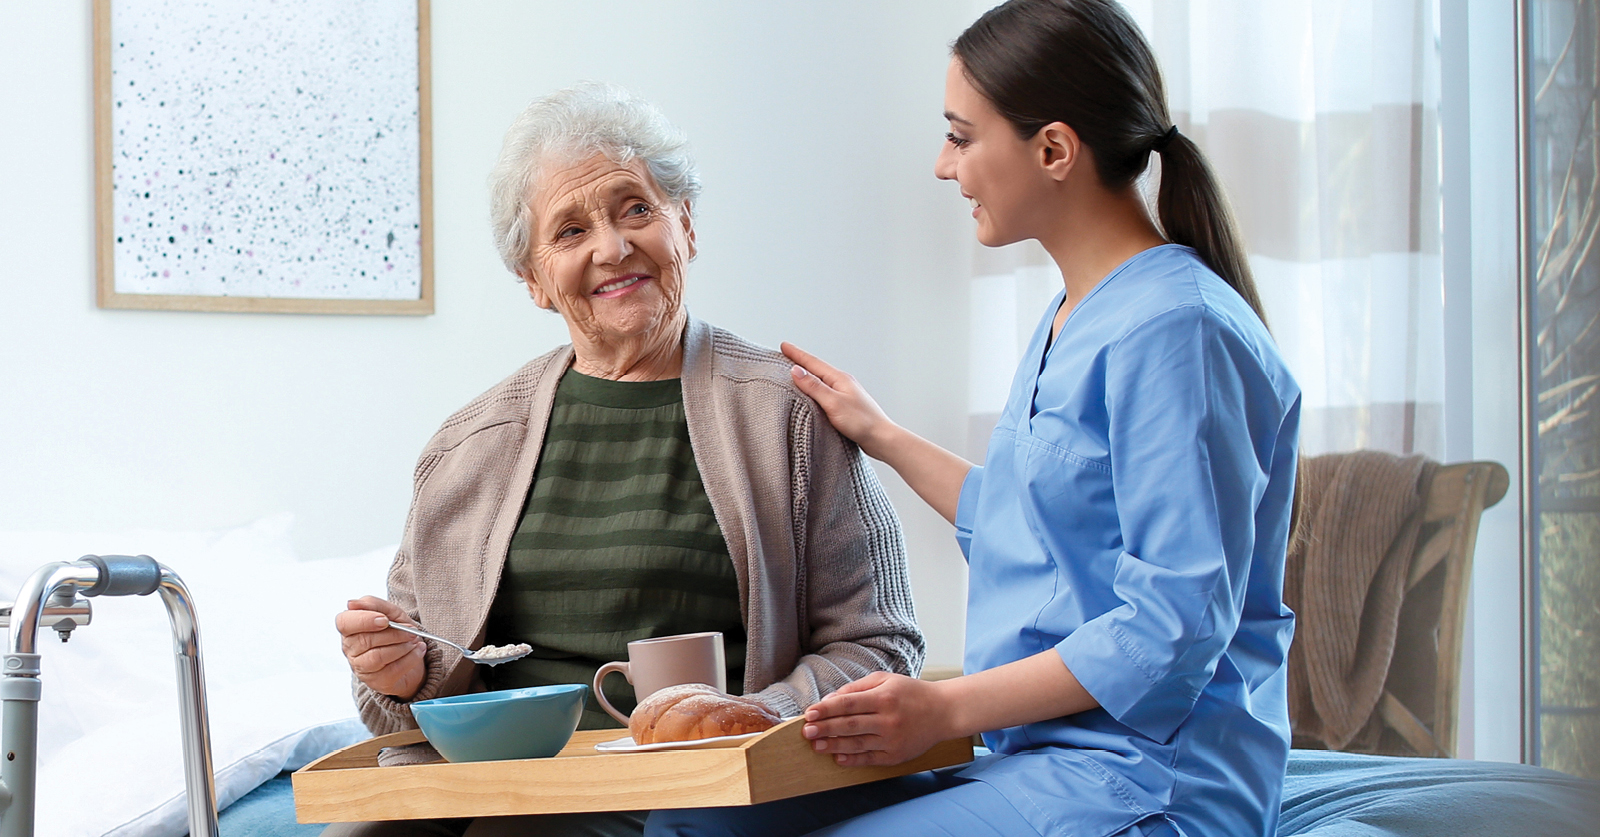 Top 10 Safety Tips for Seniors Receiving In-Home Care - Acti-Kare ...